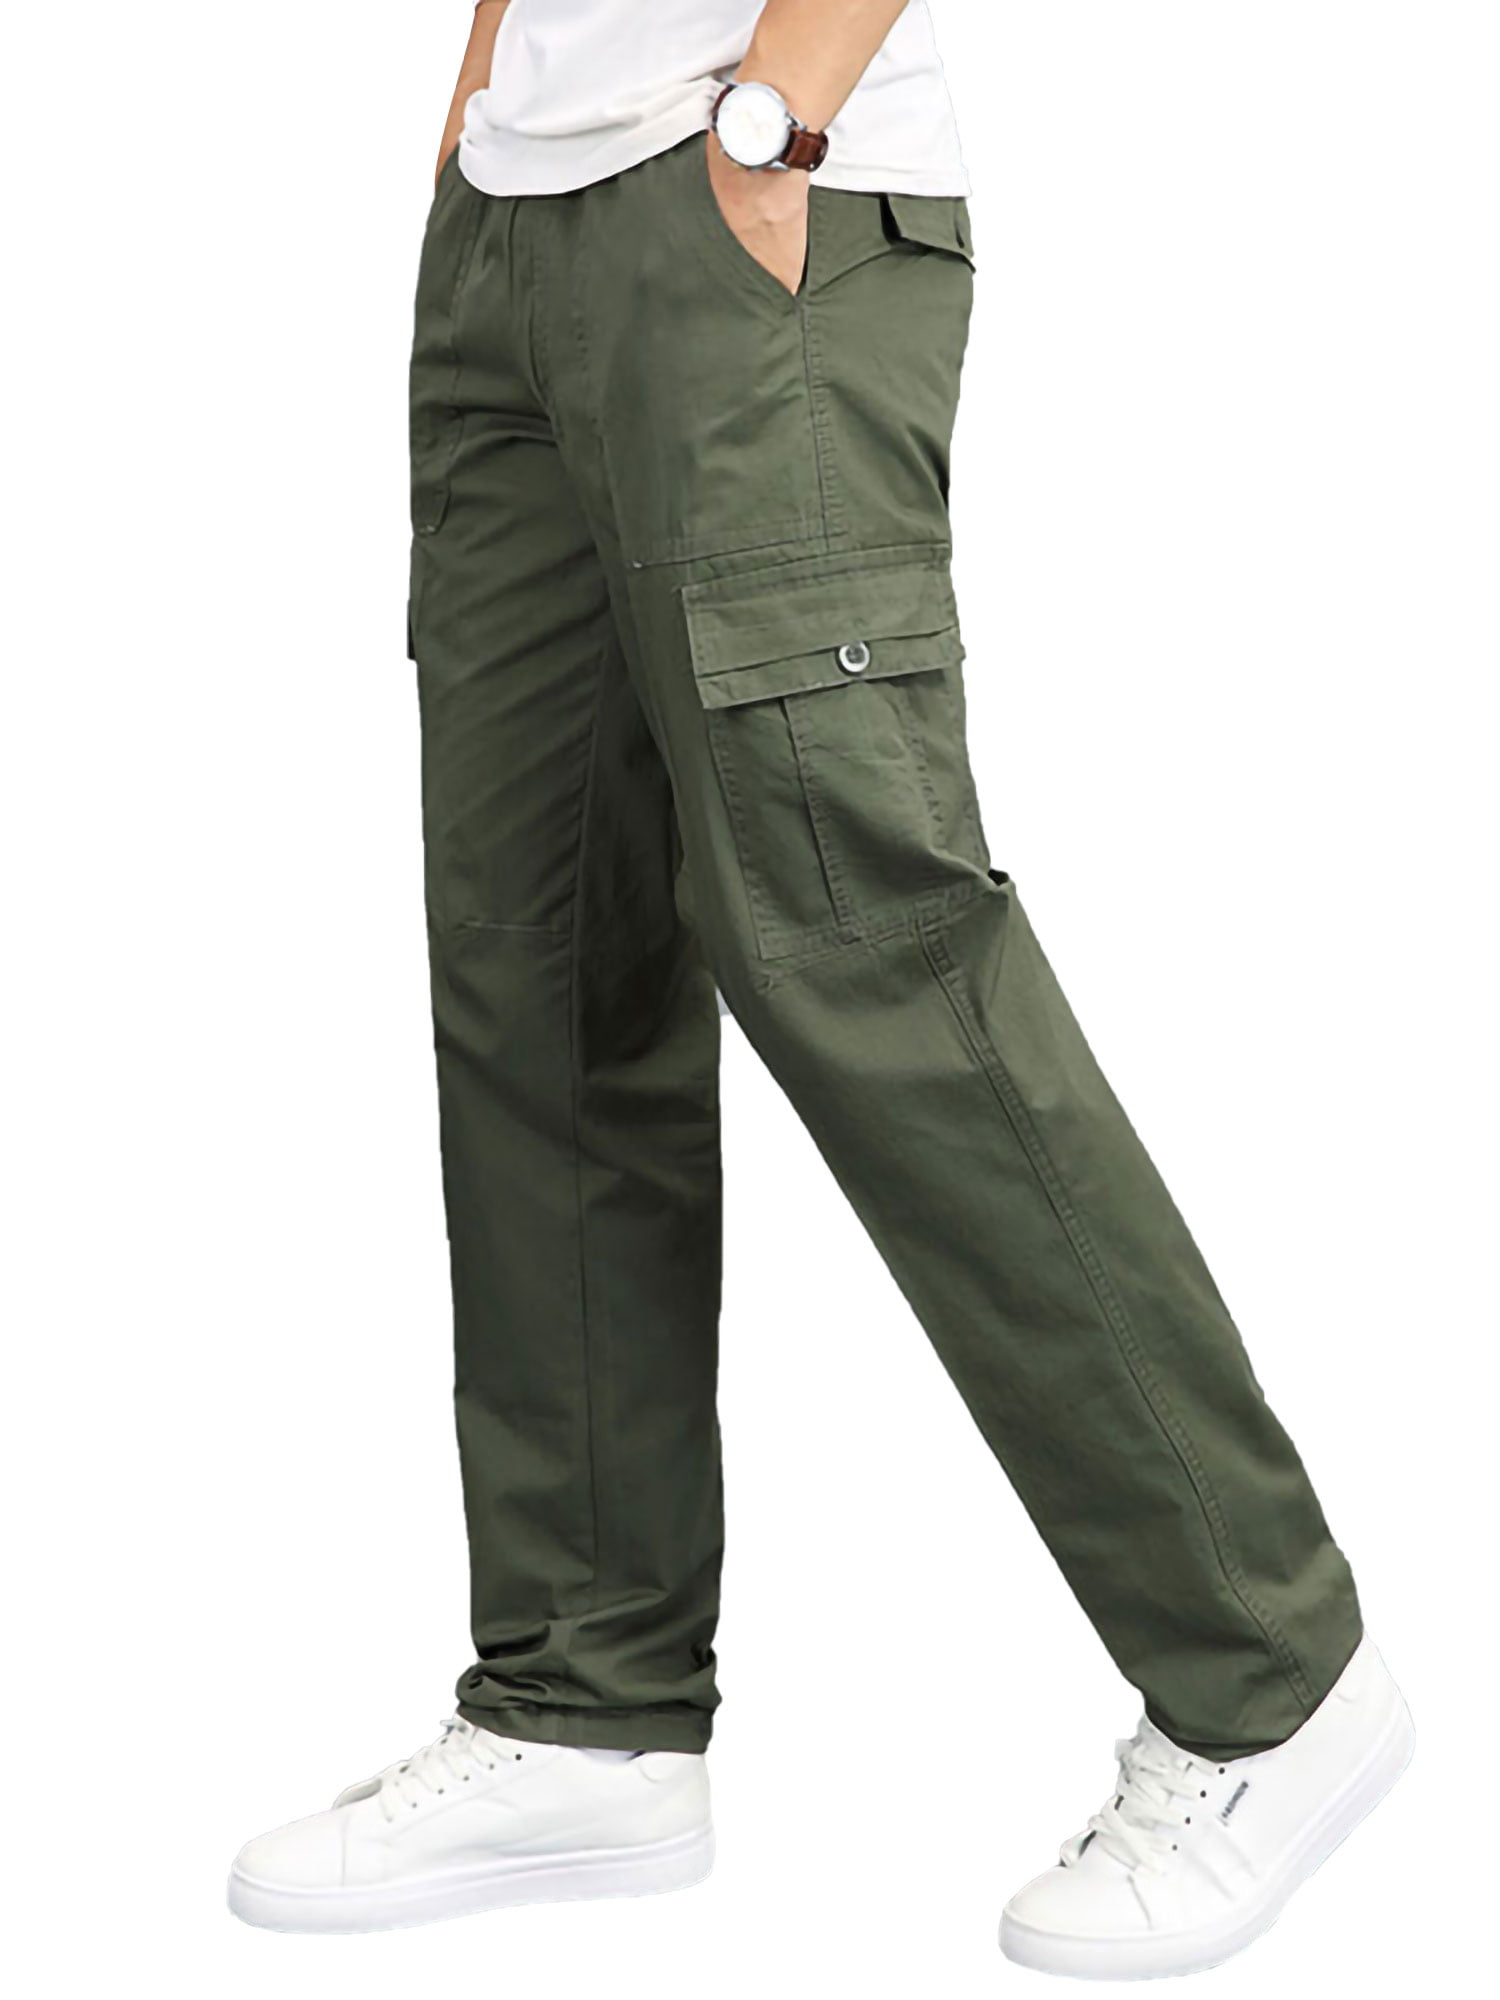 Gochange Mens Cargo Pants with Pockets Cotton Elastic Waist Ripstop Stretch Relaxed Fit Military Tactical Work Pants for Men